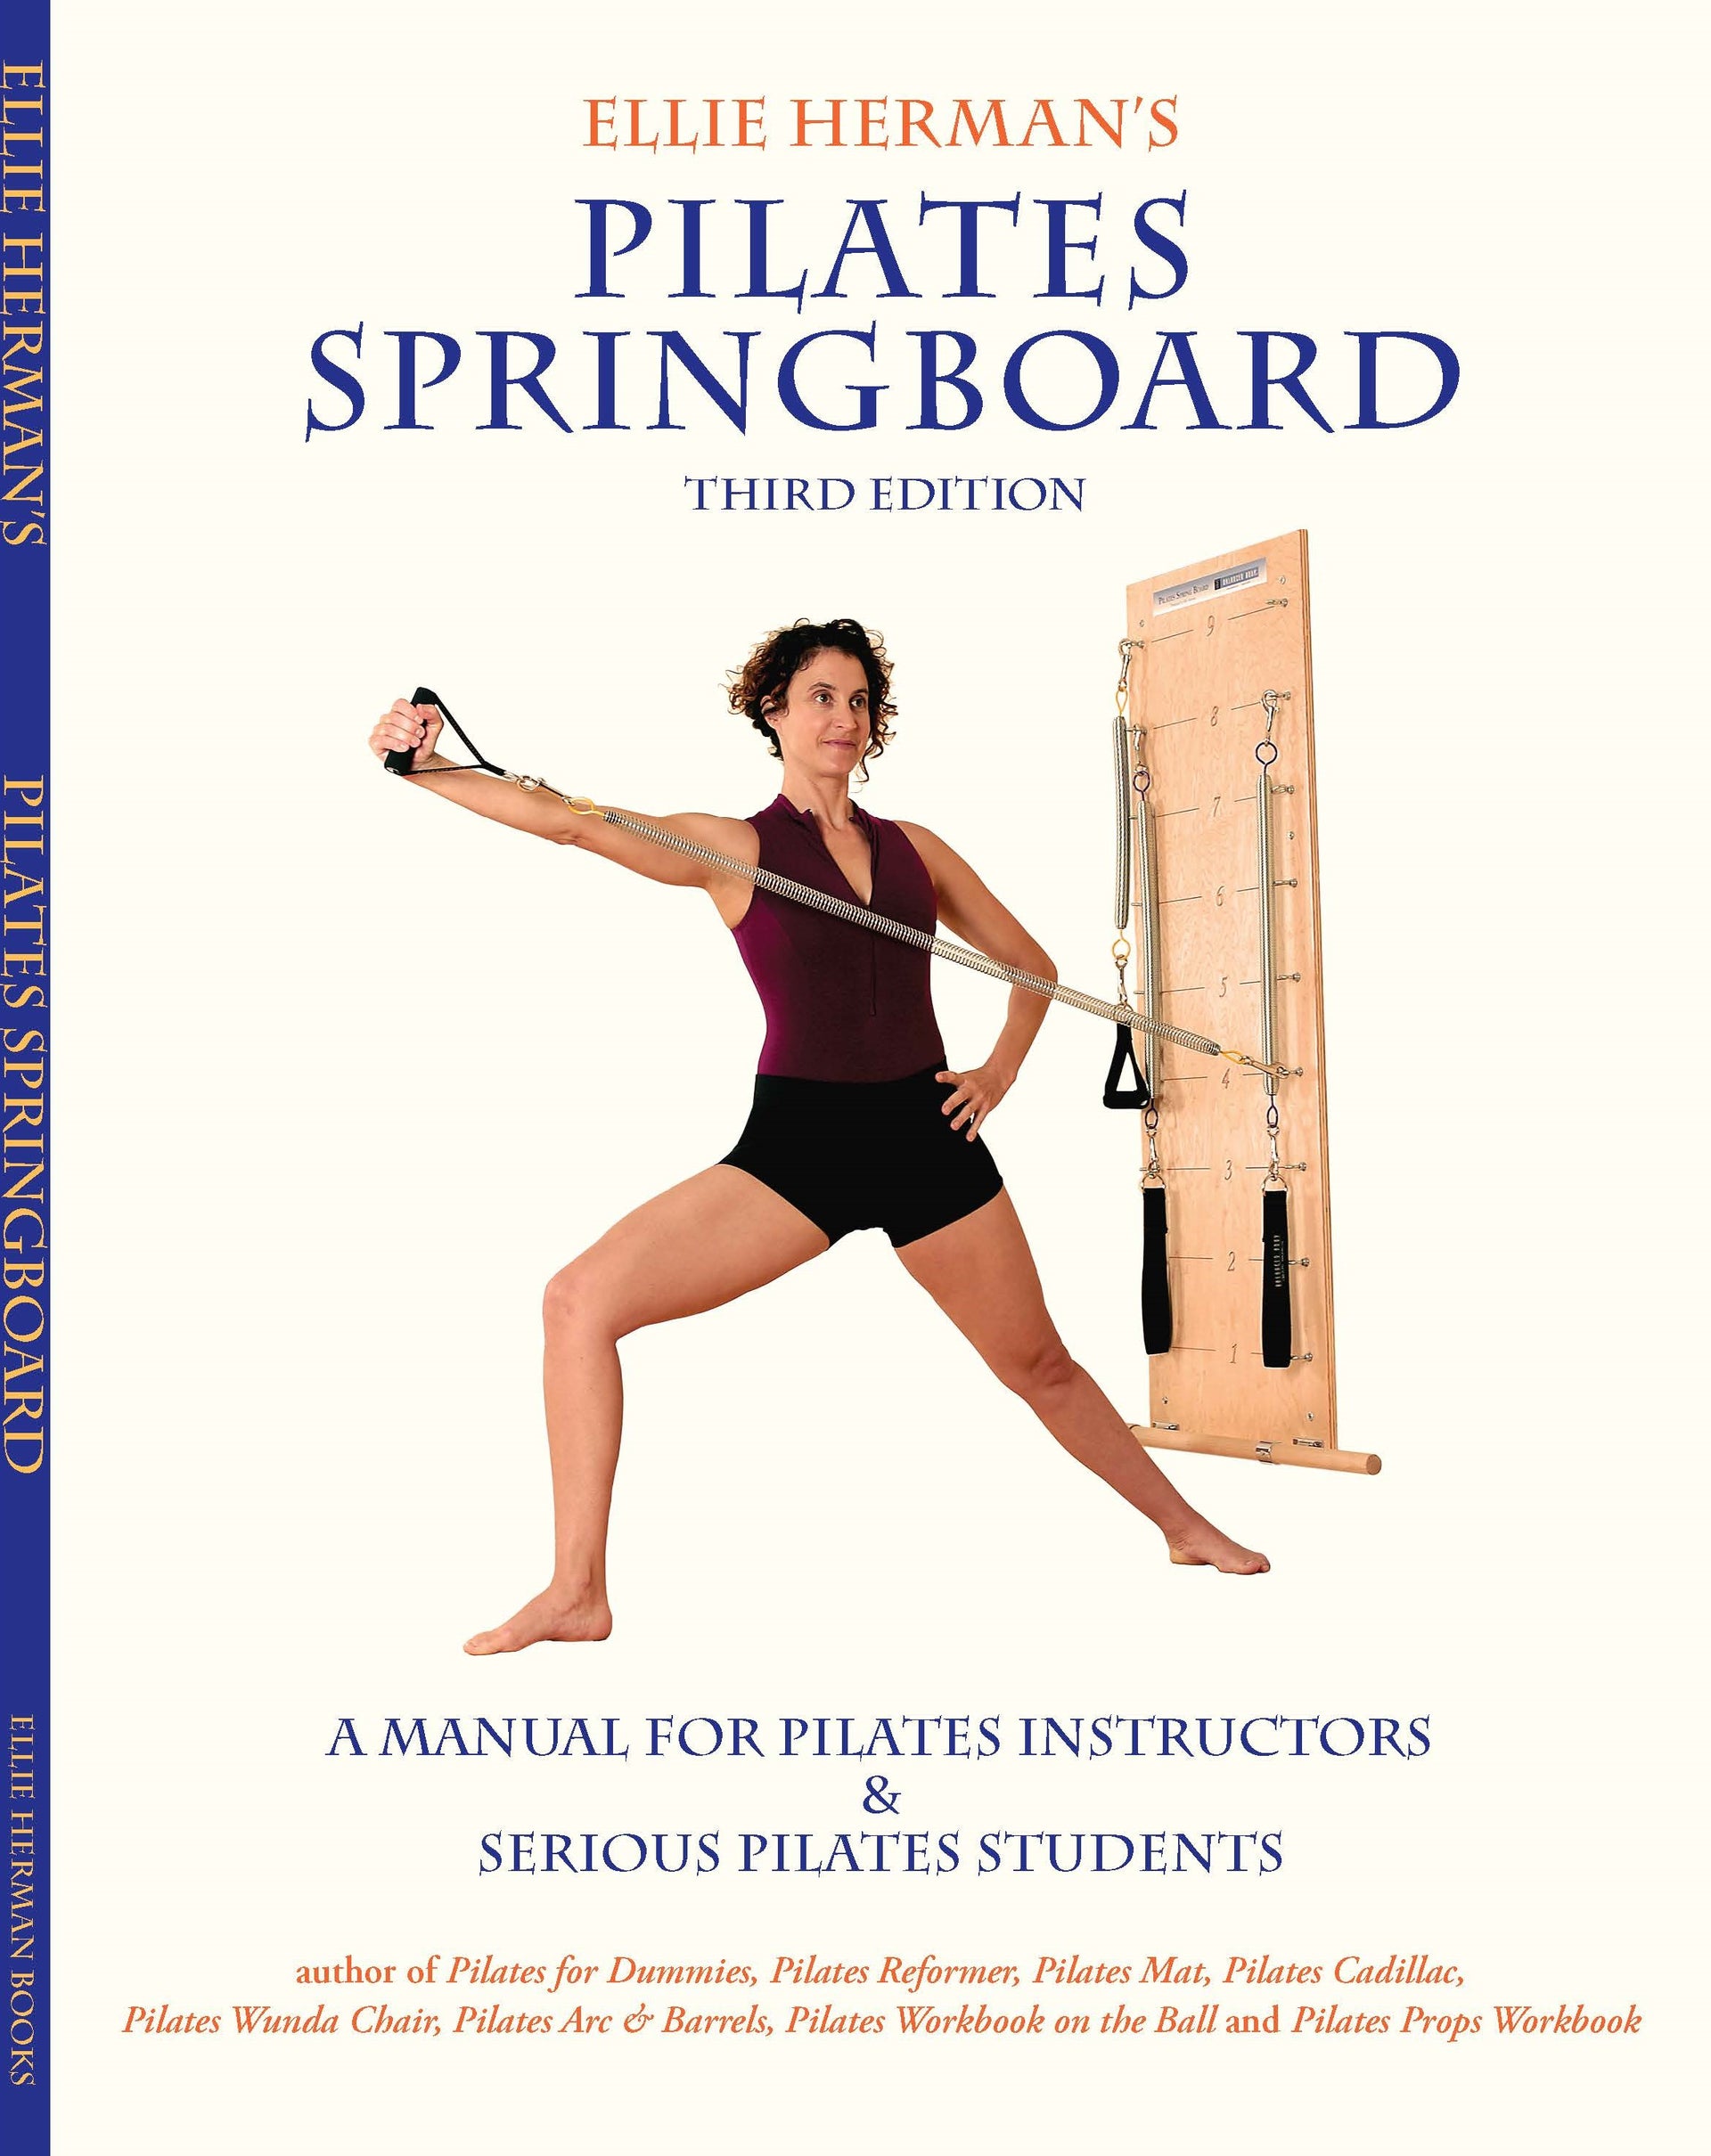 Ellie Herman’s Reformer: A Manual For Pilates Instructors & Serious Pilates  Students, Third Edition- PDF